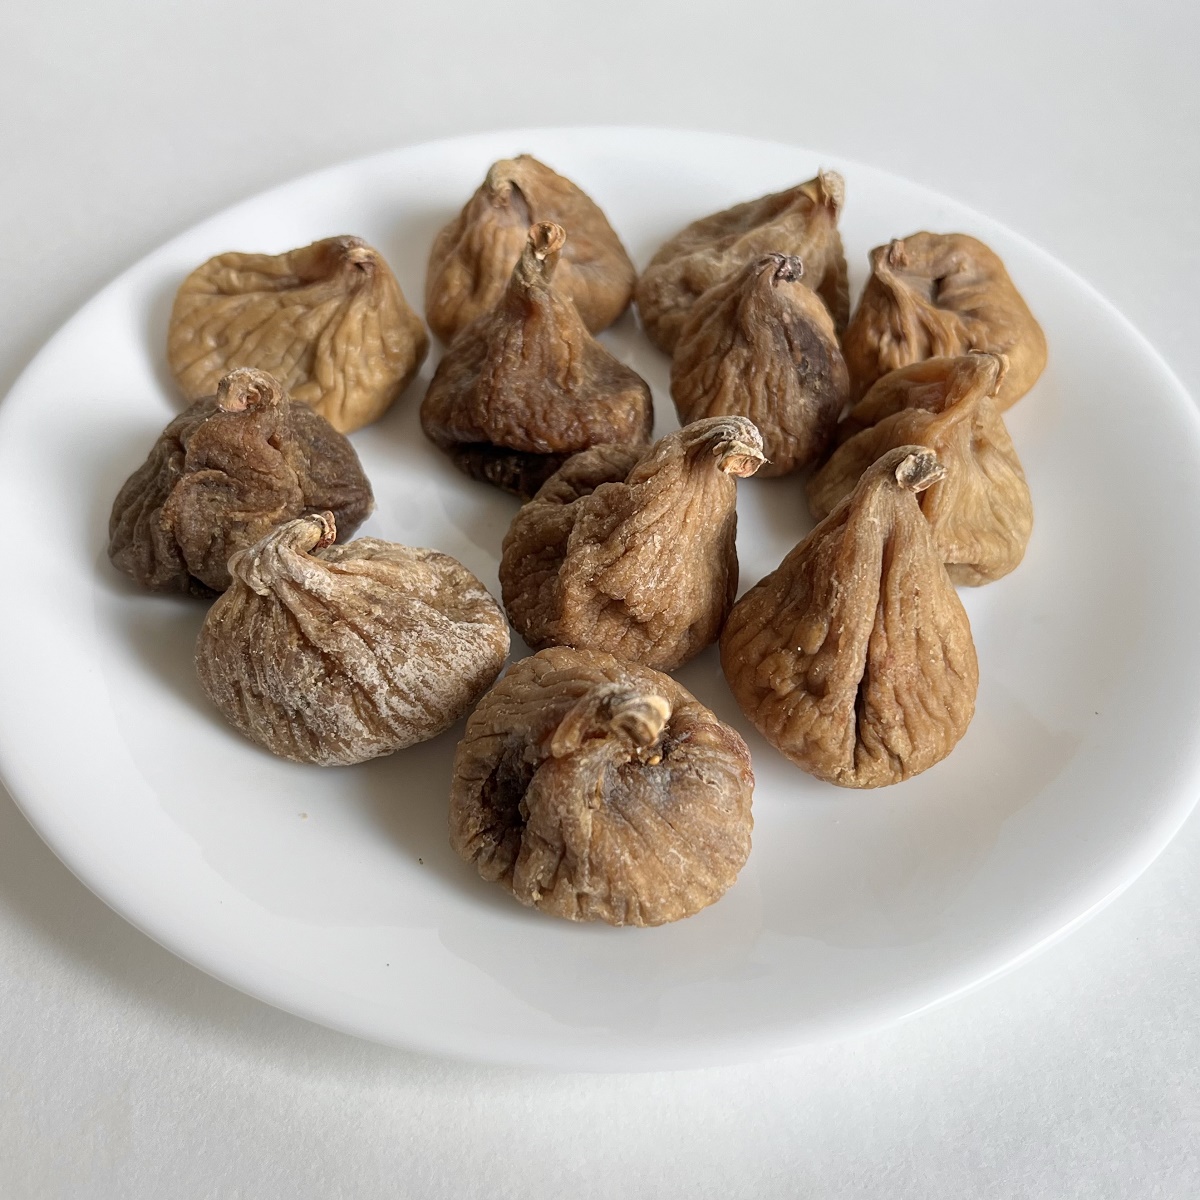 Twelve dried figs on a white plate.